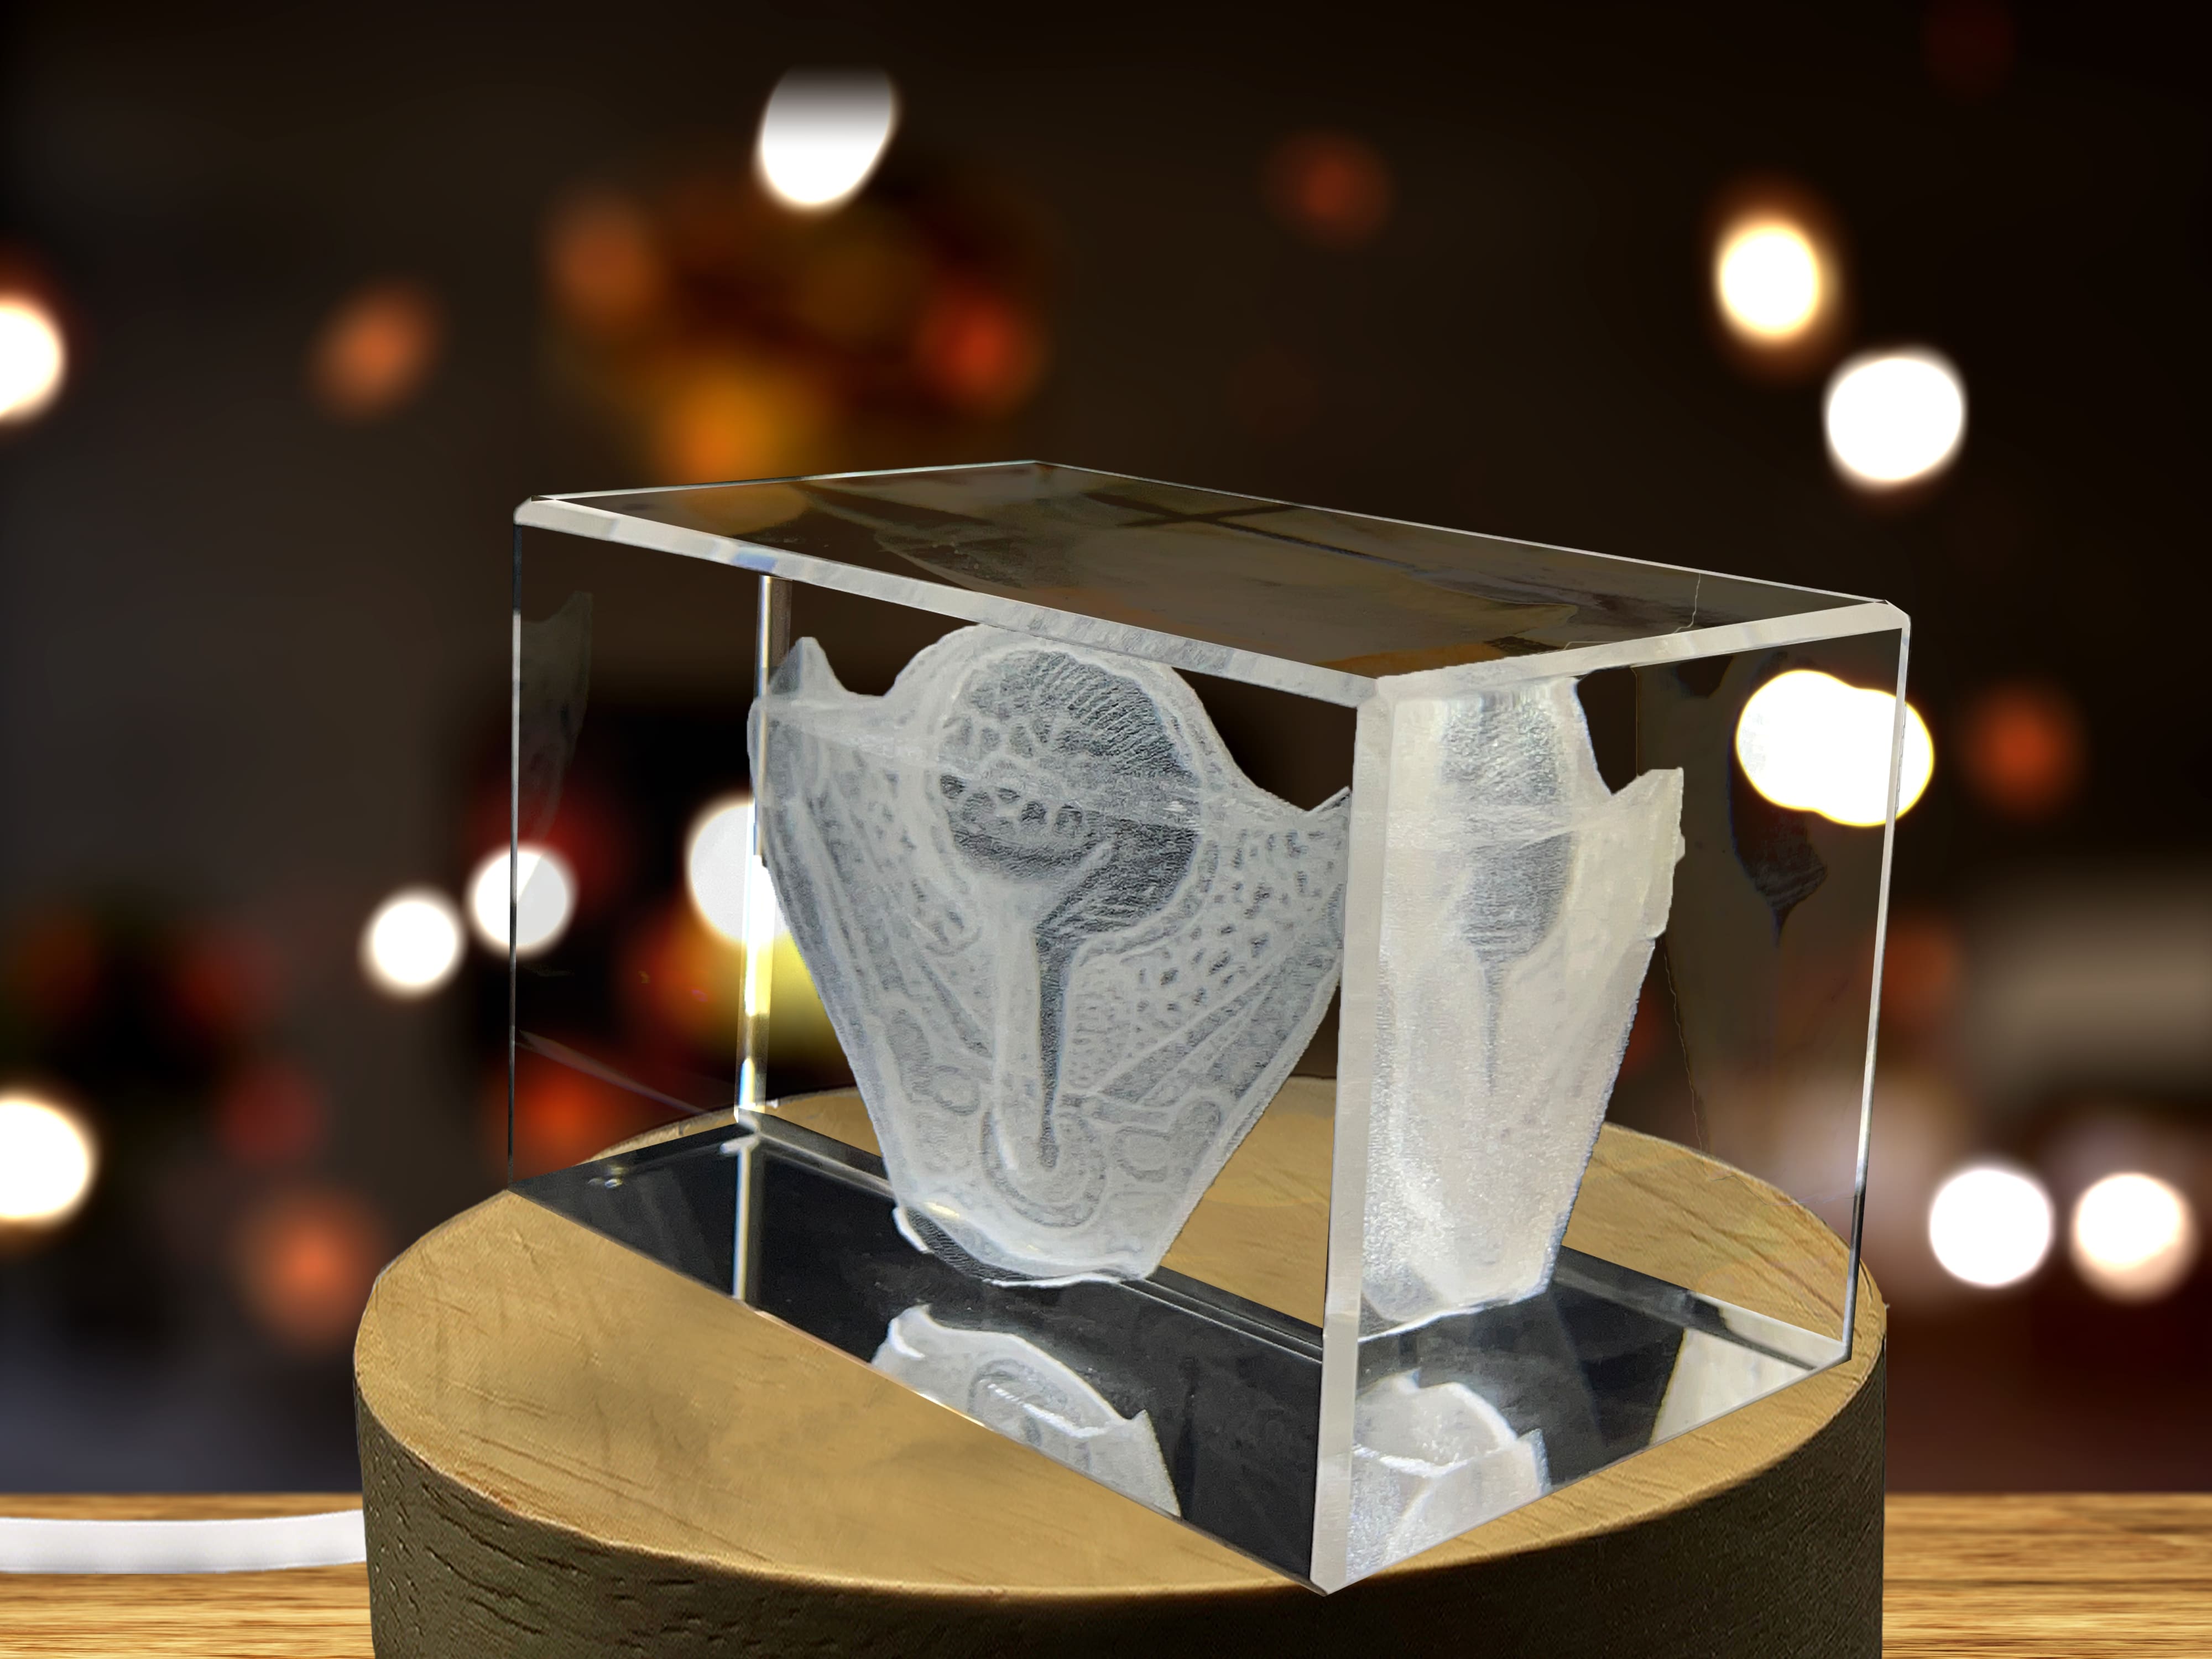 Urinary bladder | 3D Engraved Crystal Keepsake | Gift For Urologists | Doctor Gift A&B Crystal Collection